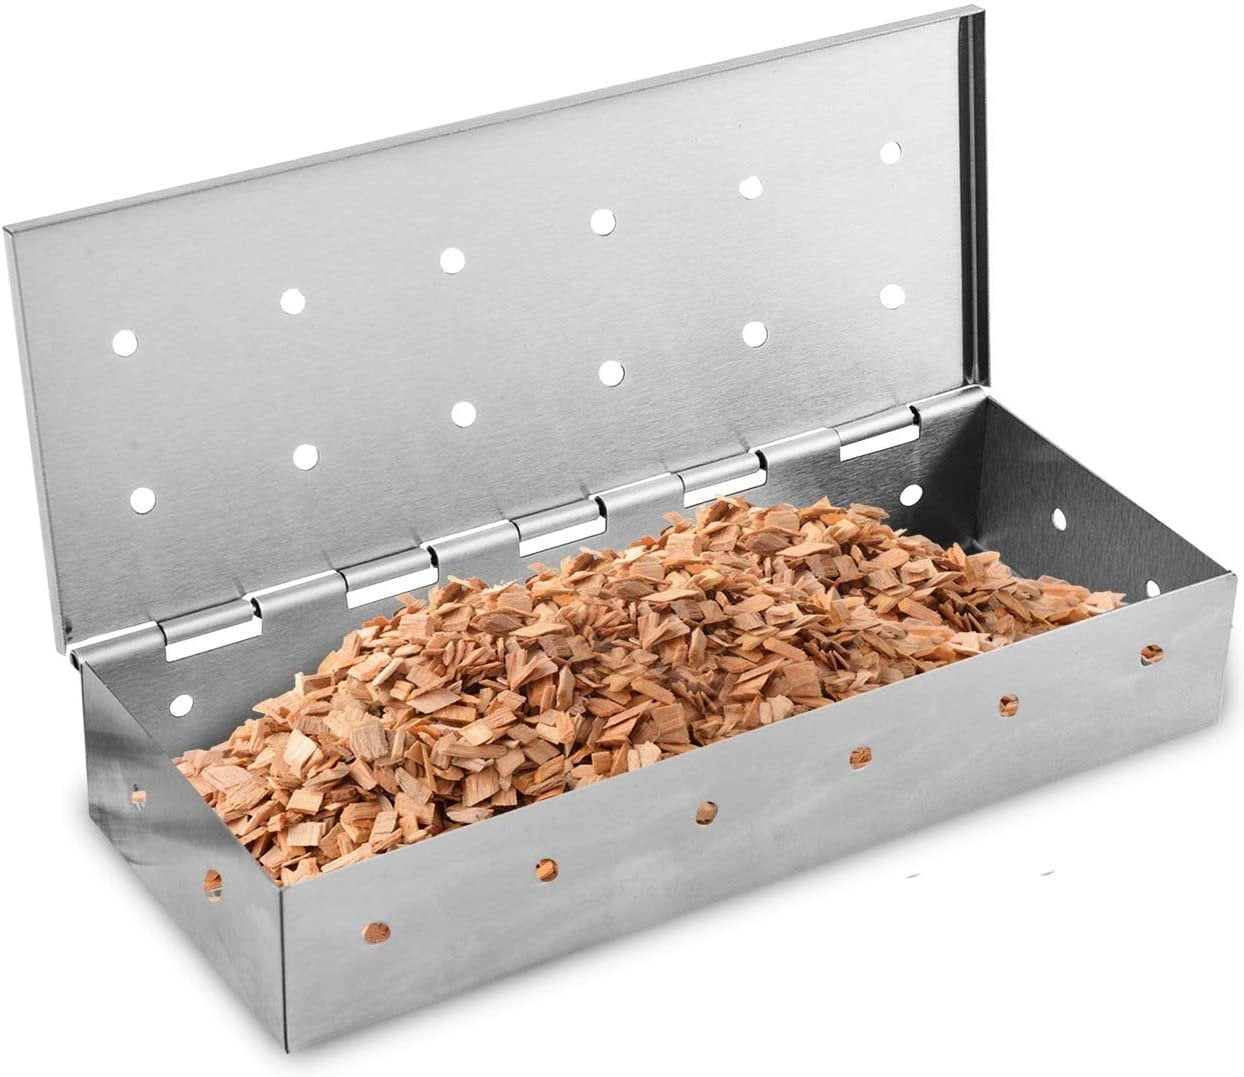 Mockins Stainless Steel BBQ Smoker Box for Grilling Barbecue Wood Chips On Ga... 